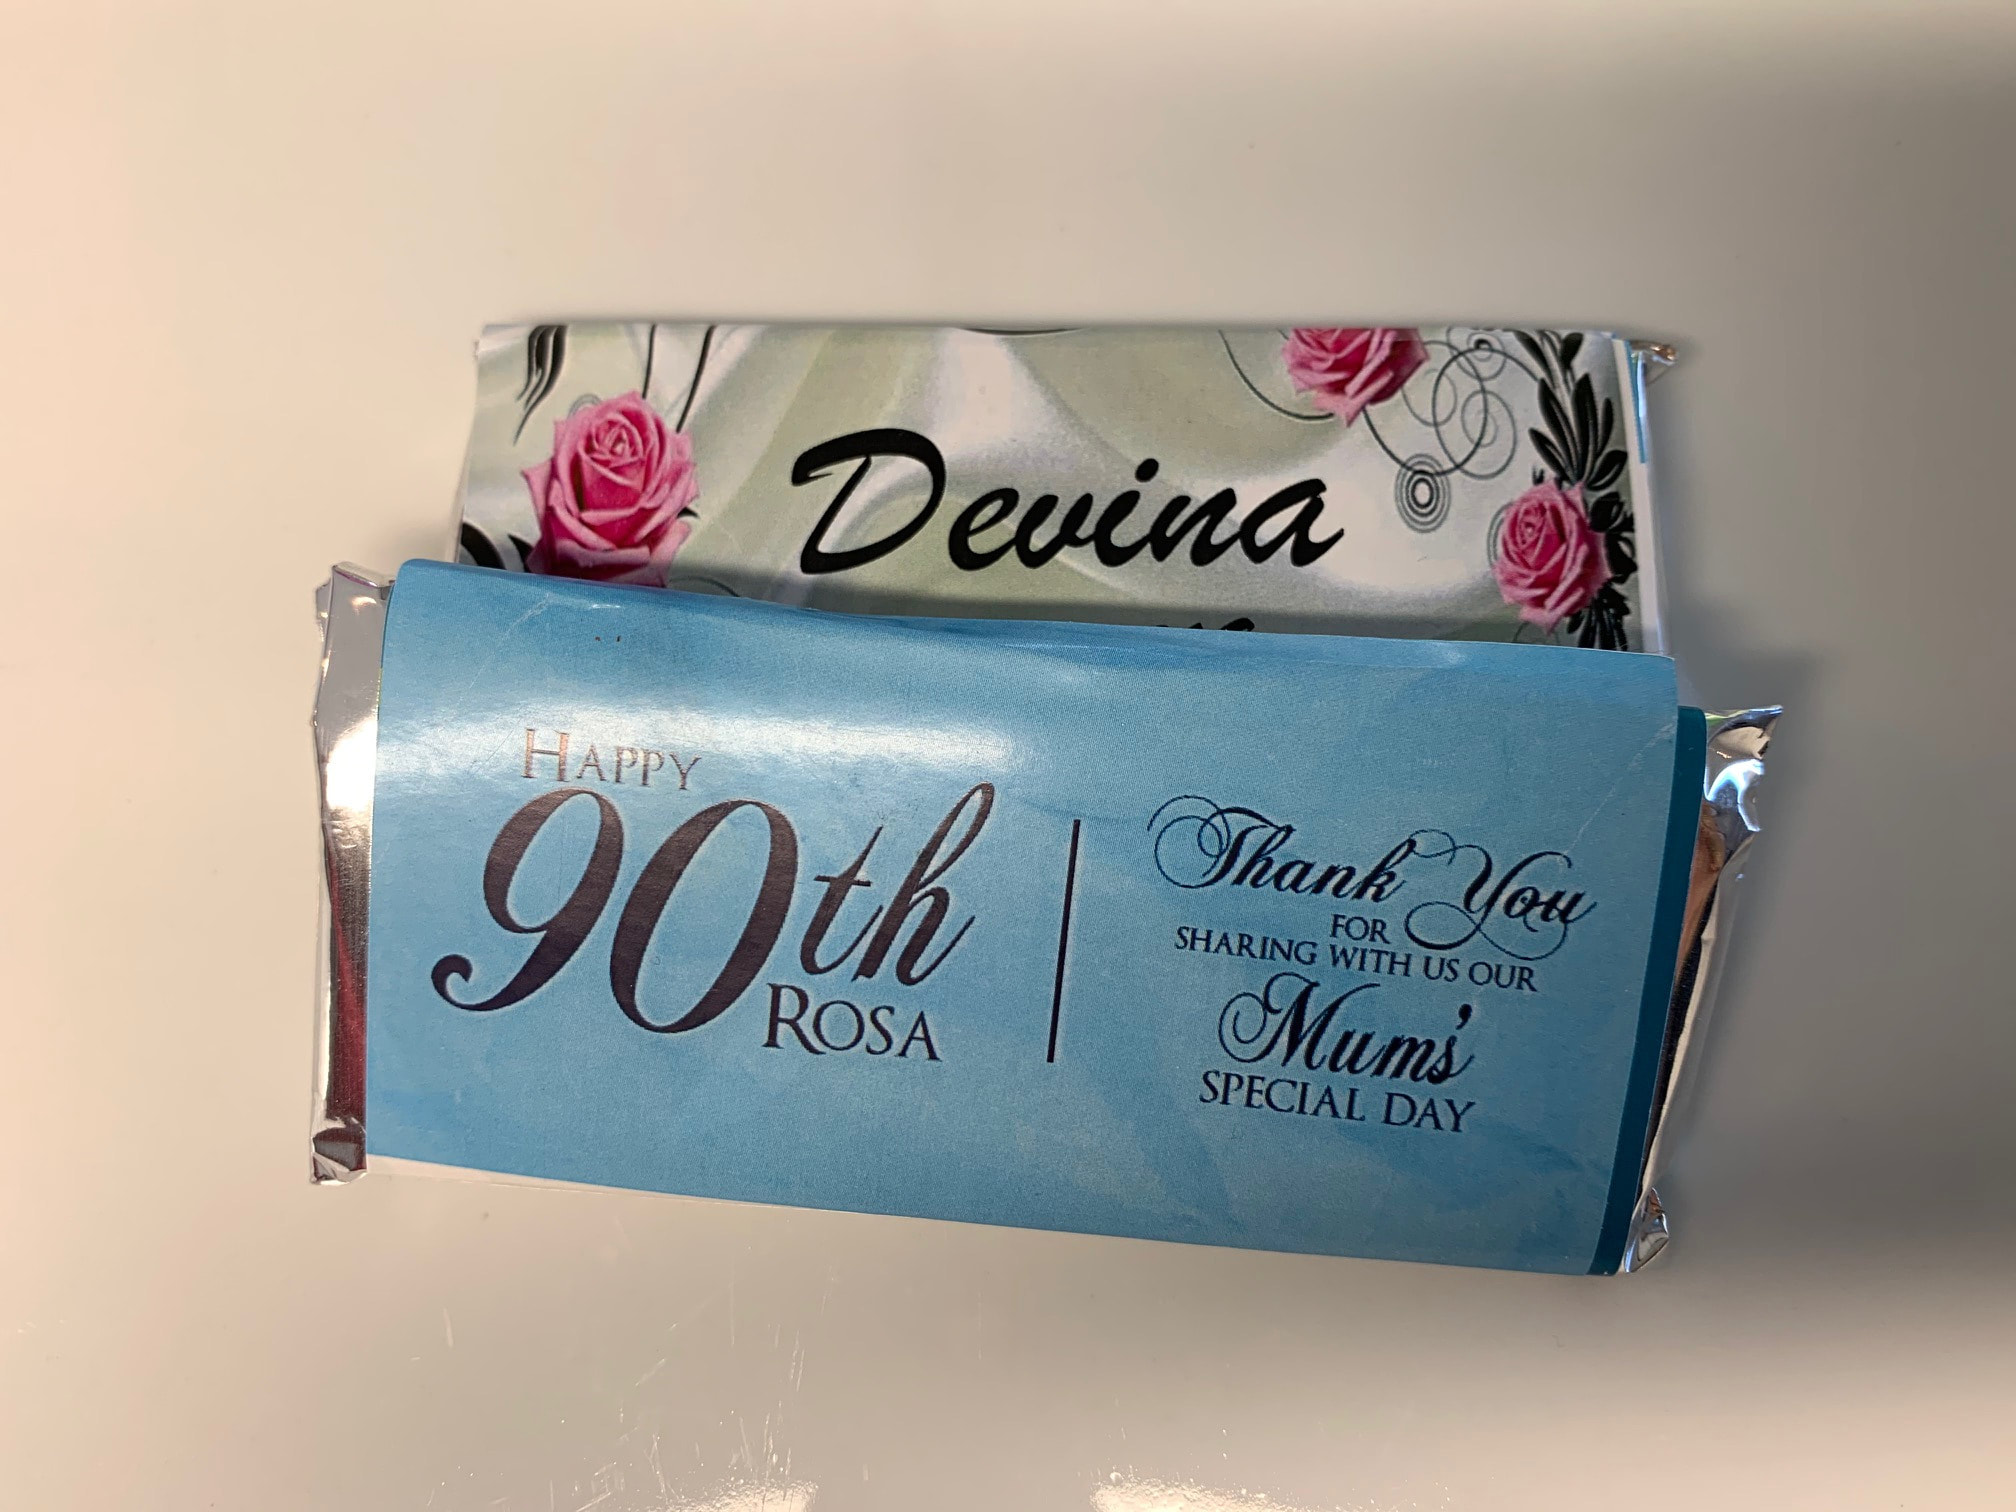 25 Chocolate Bars with Your Own Personal Design and Message on the Wrapper